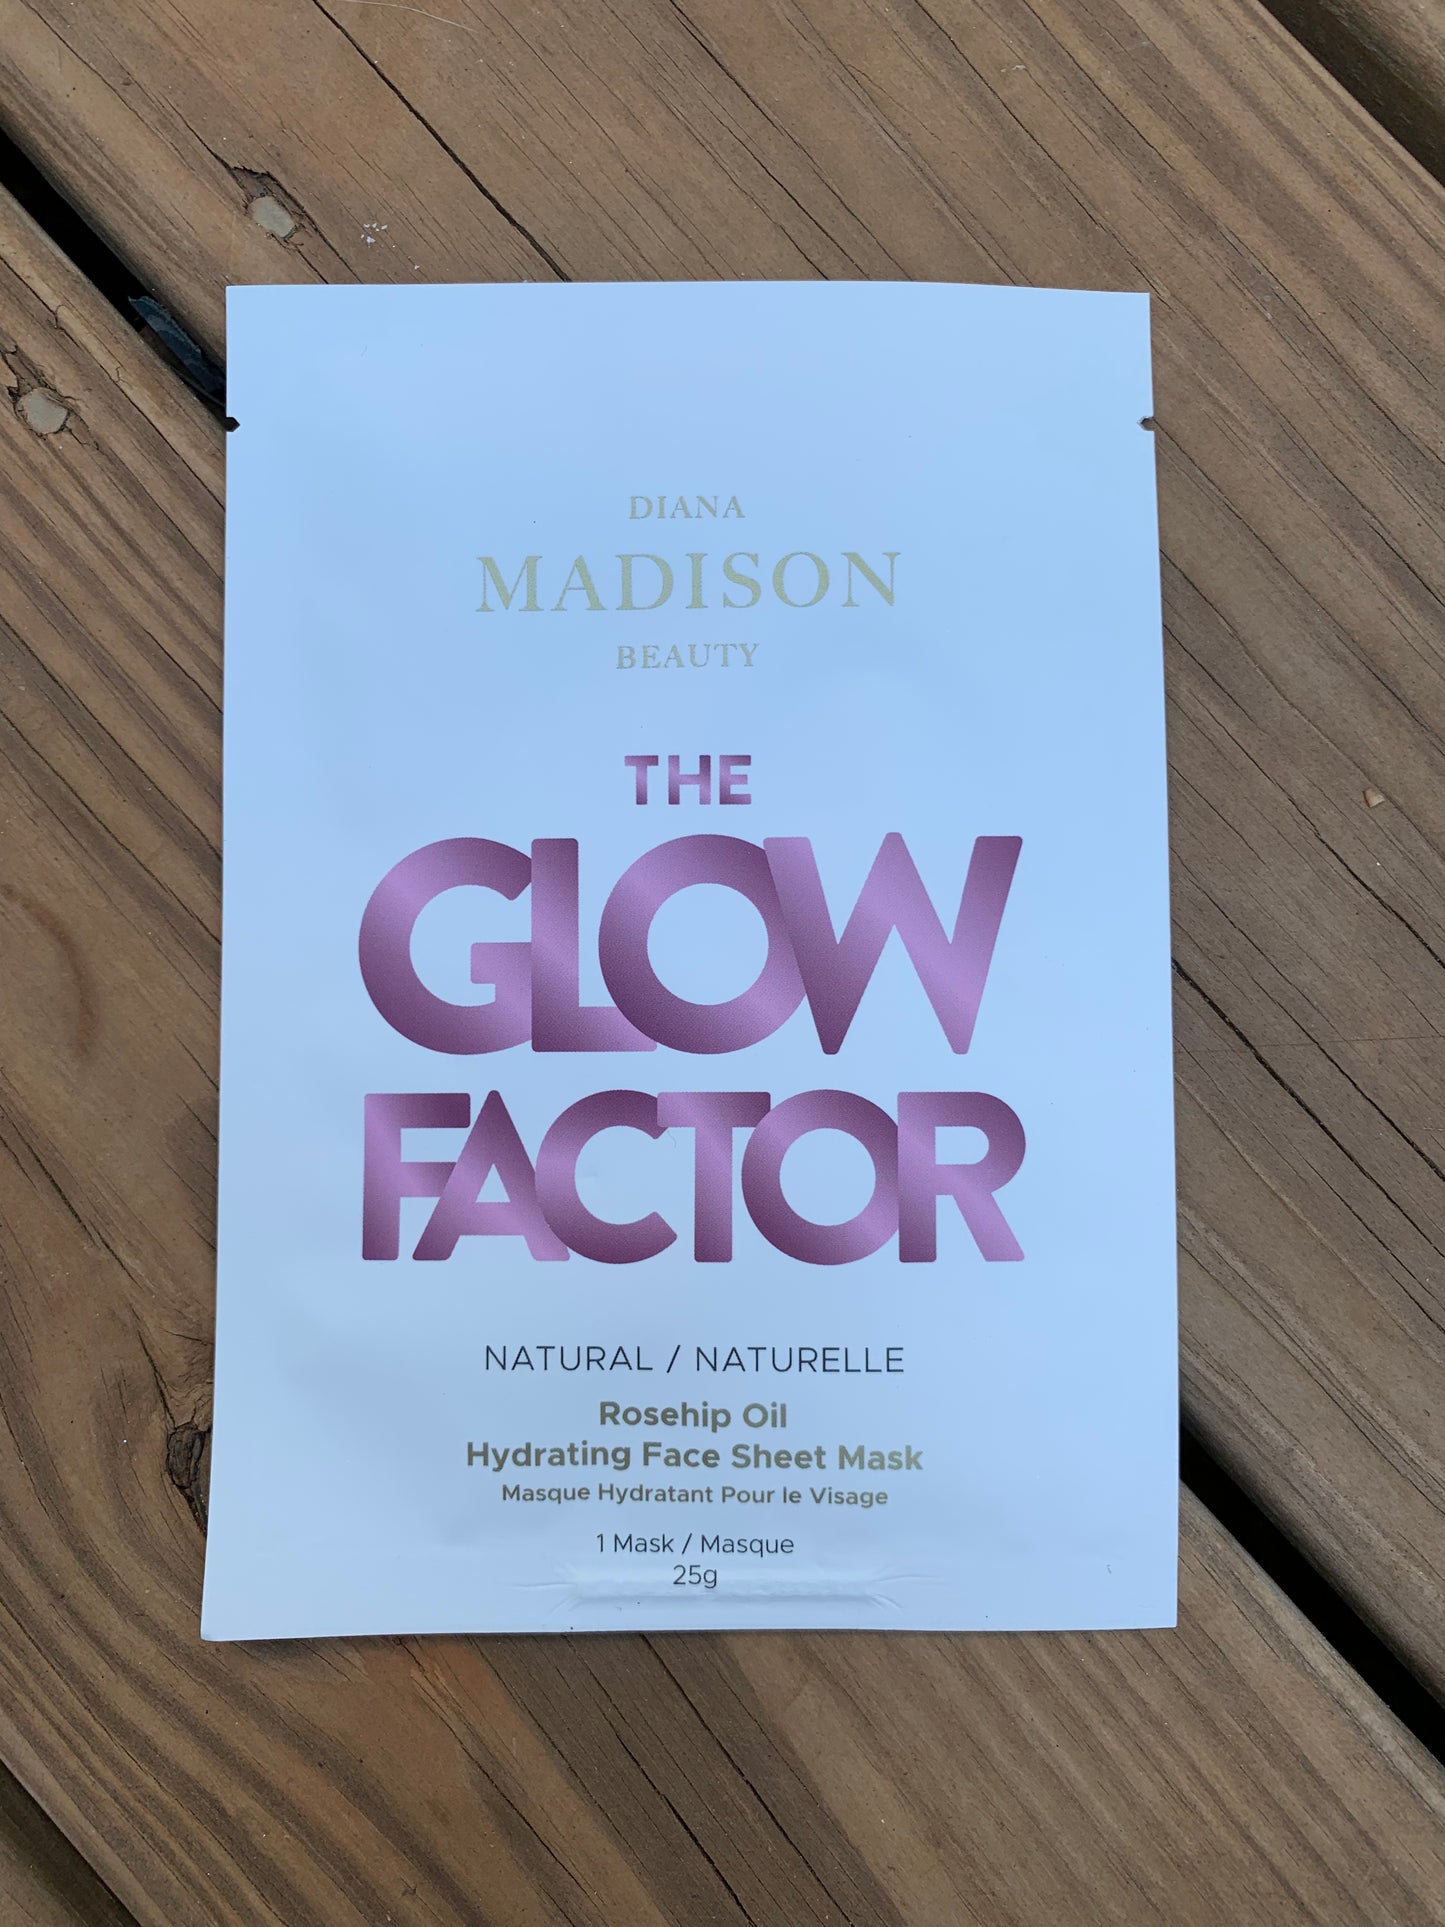 Diana Madison Beauty The Glow Factor Face Sheet Mask